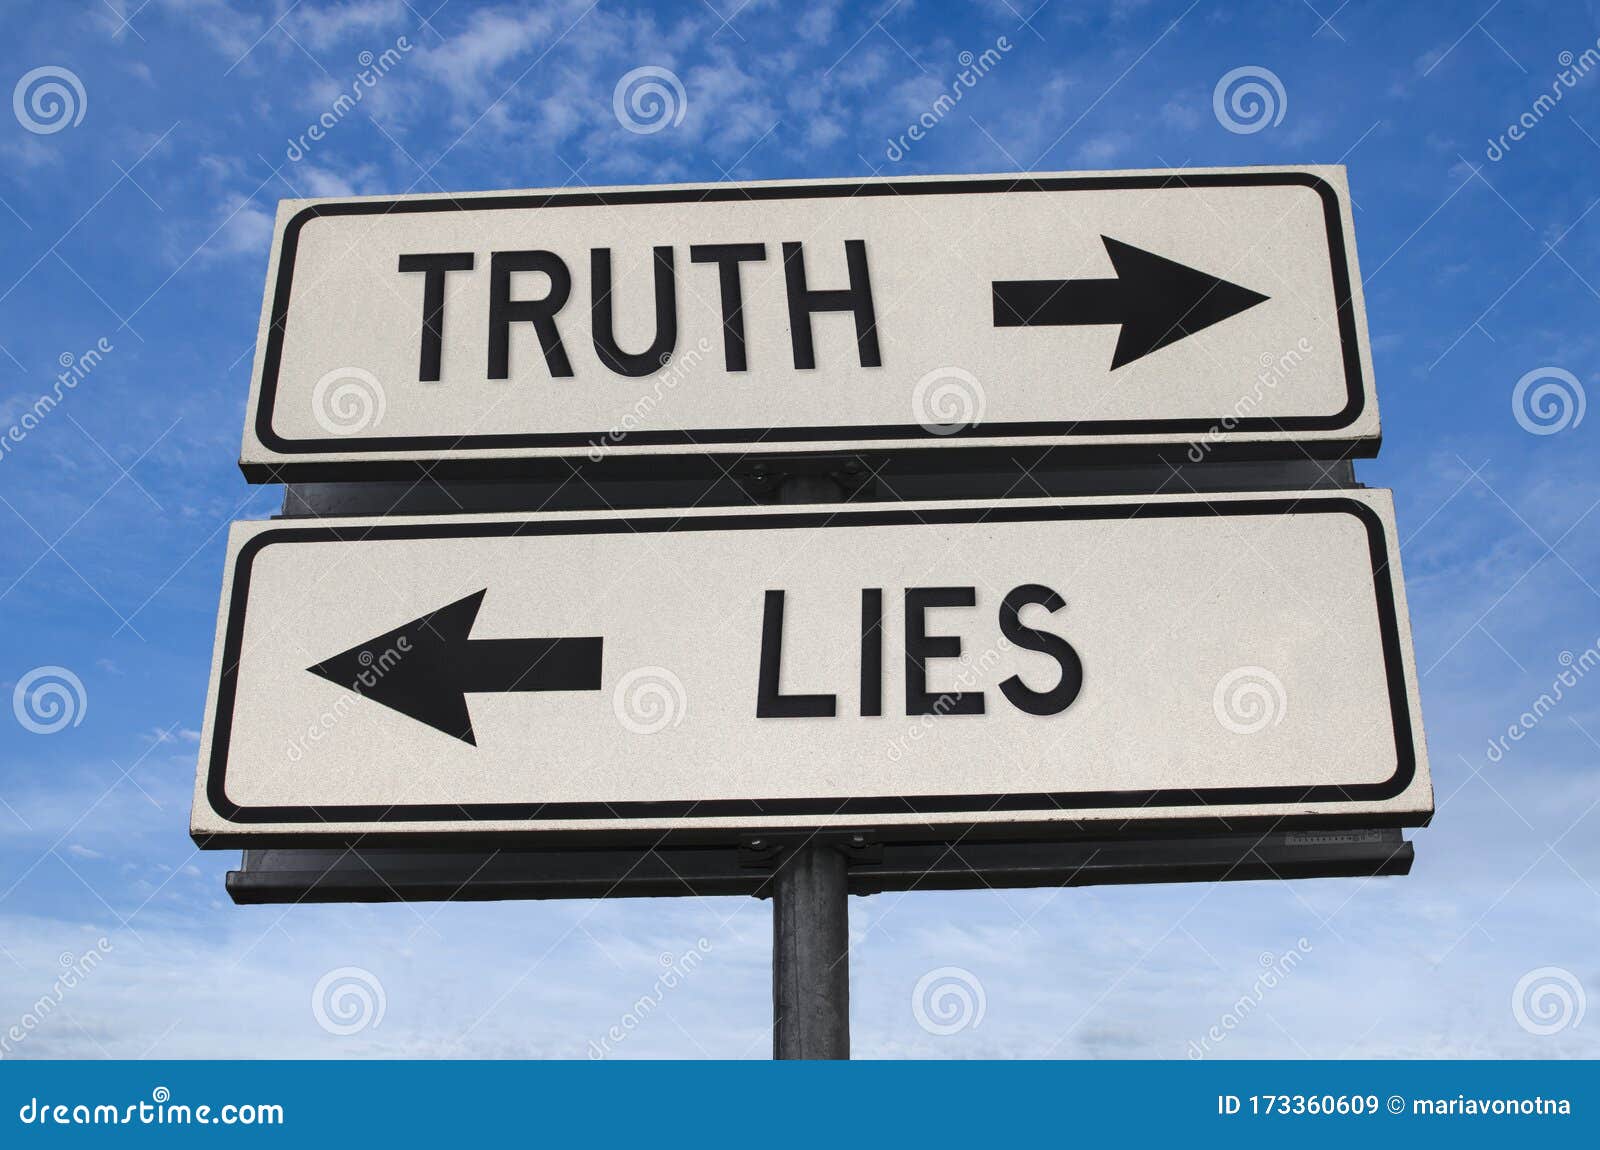 truth vs lies. white two street signs with arrow on metal pole with word